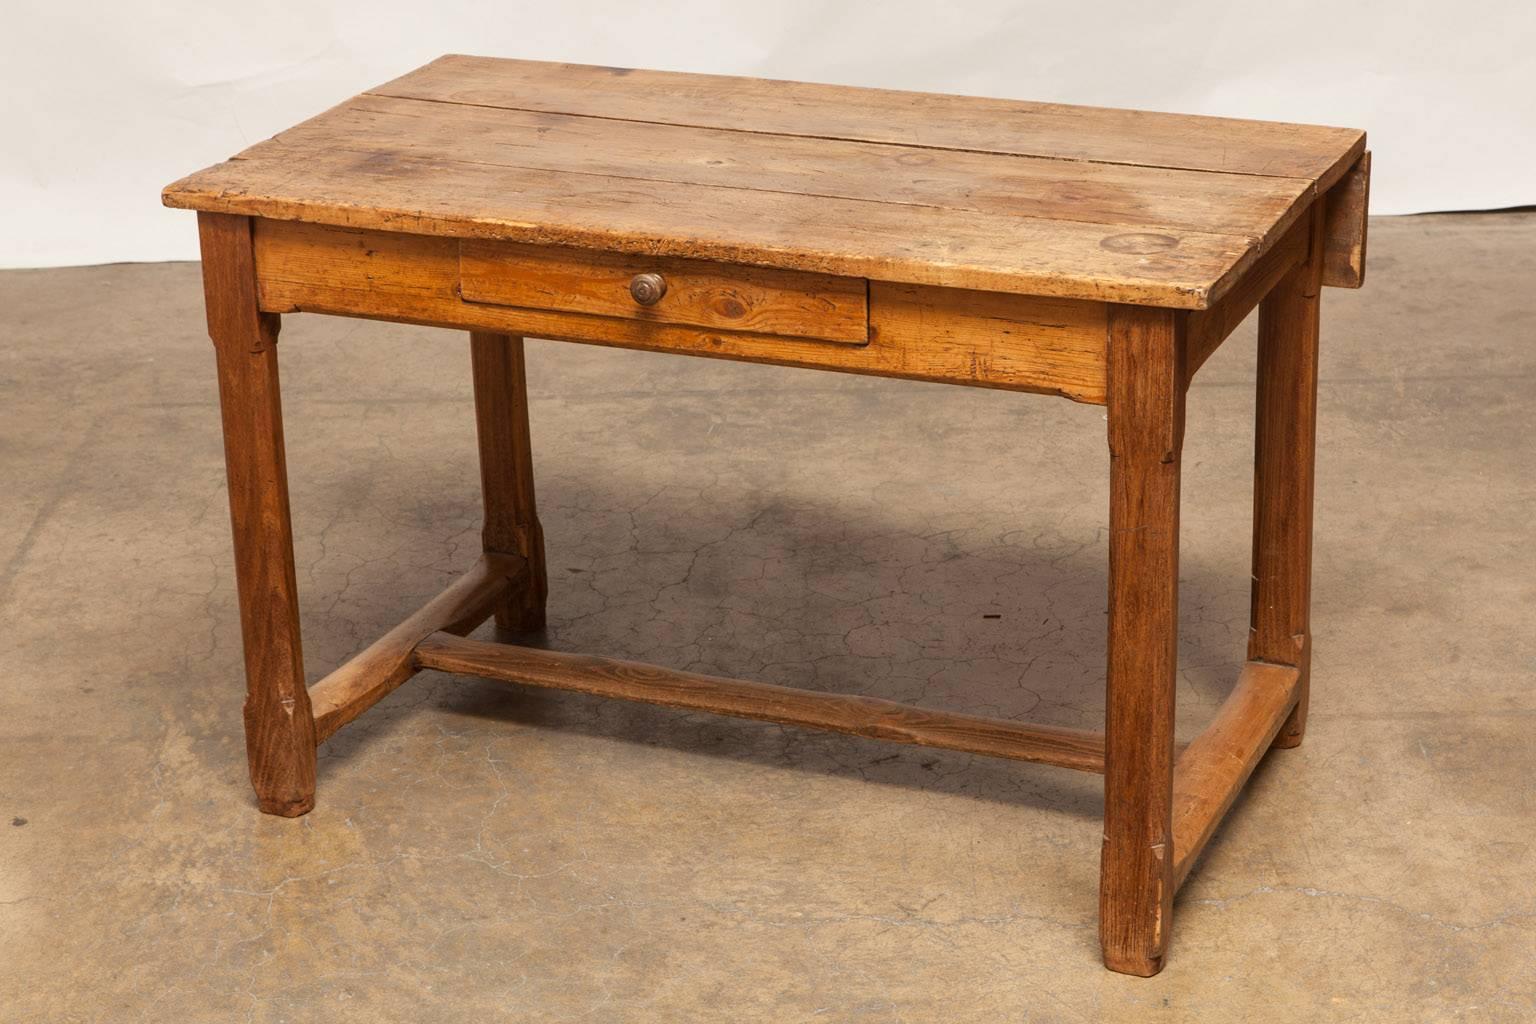 Rustic French country pine dining table that has two leaves and a fold down panel in the rear. Featuring soft, worn wood with an aged patina. Fronted by one drawer with a wooden pull and supported by square chamfered legs with rounded stretchers.